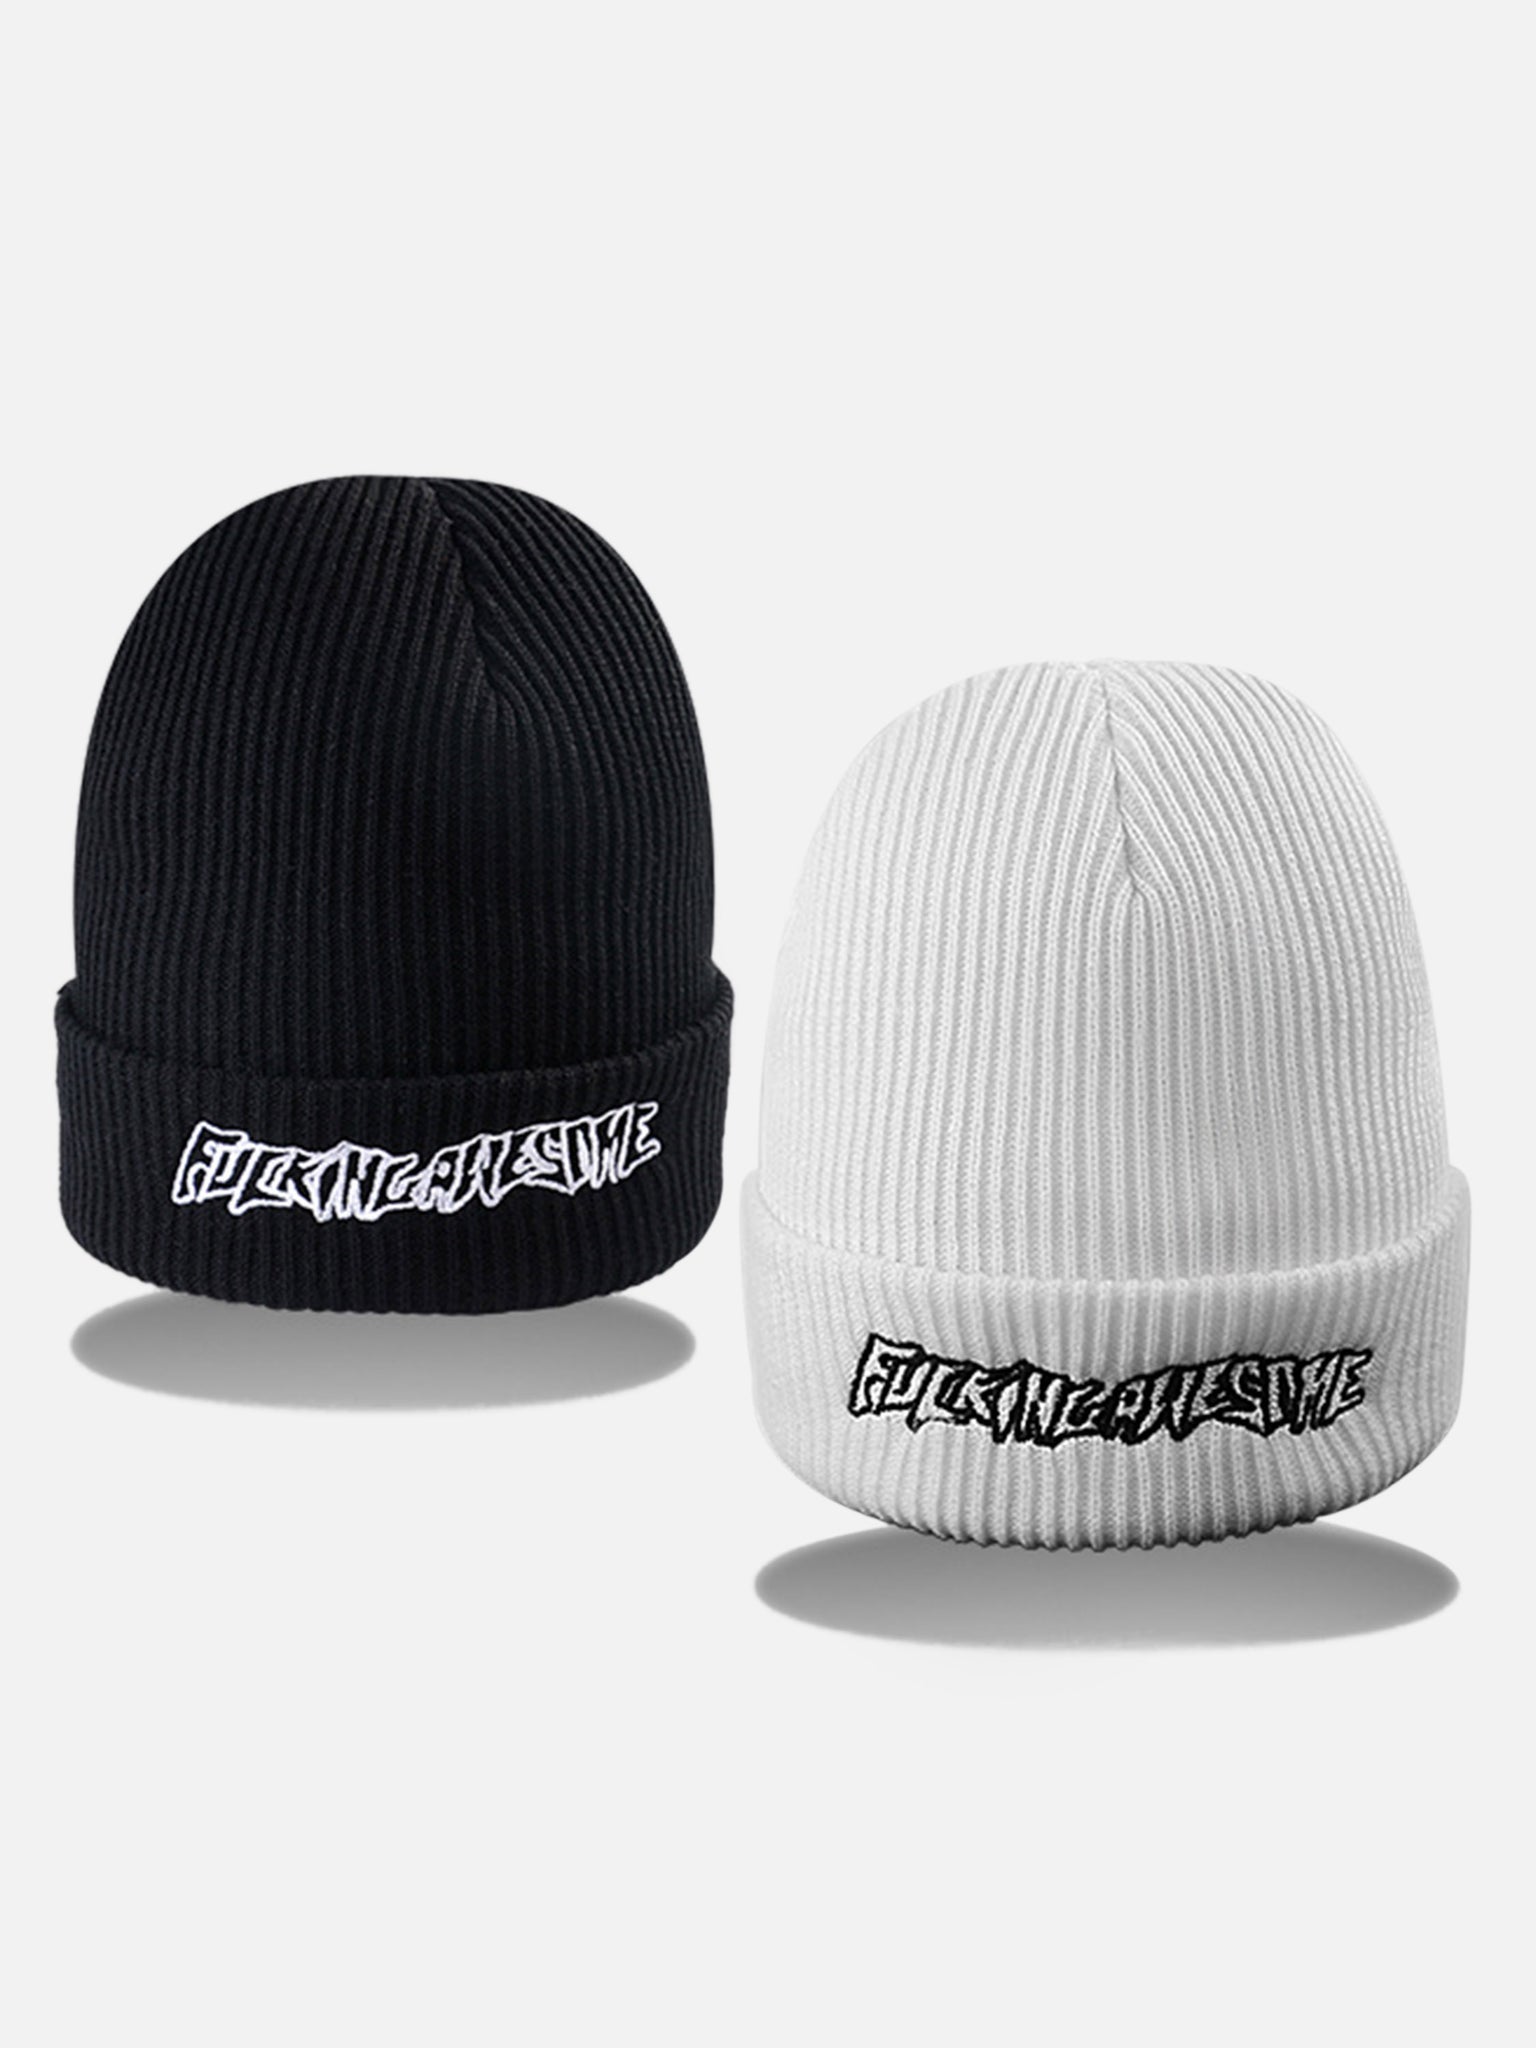 The Supermade American High Street Retro Tide Knitted Cap Winter